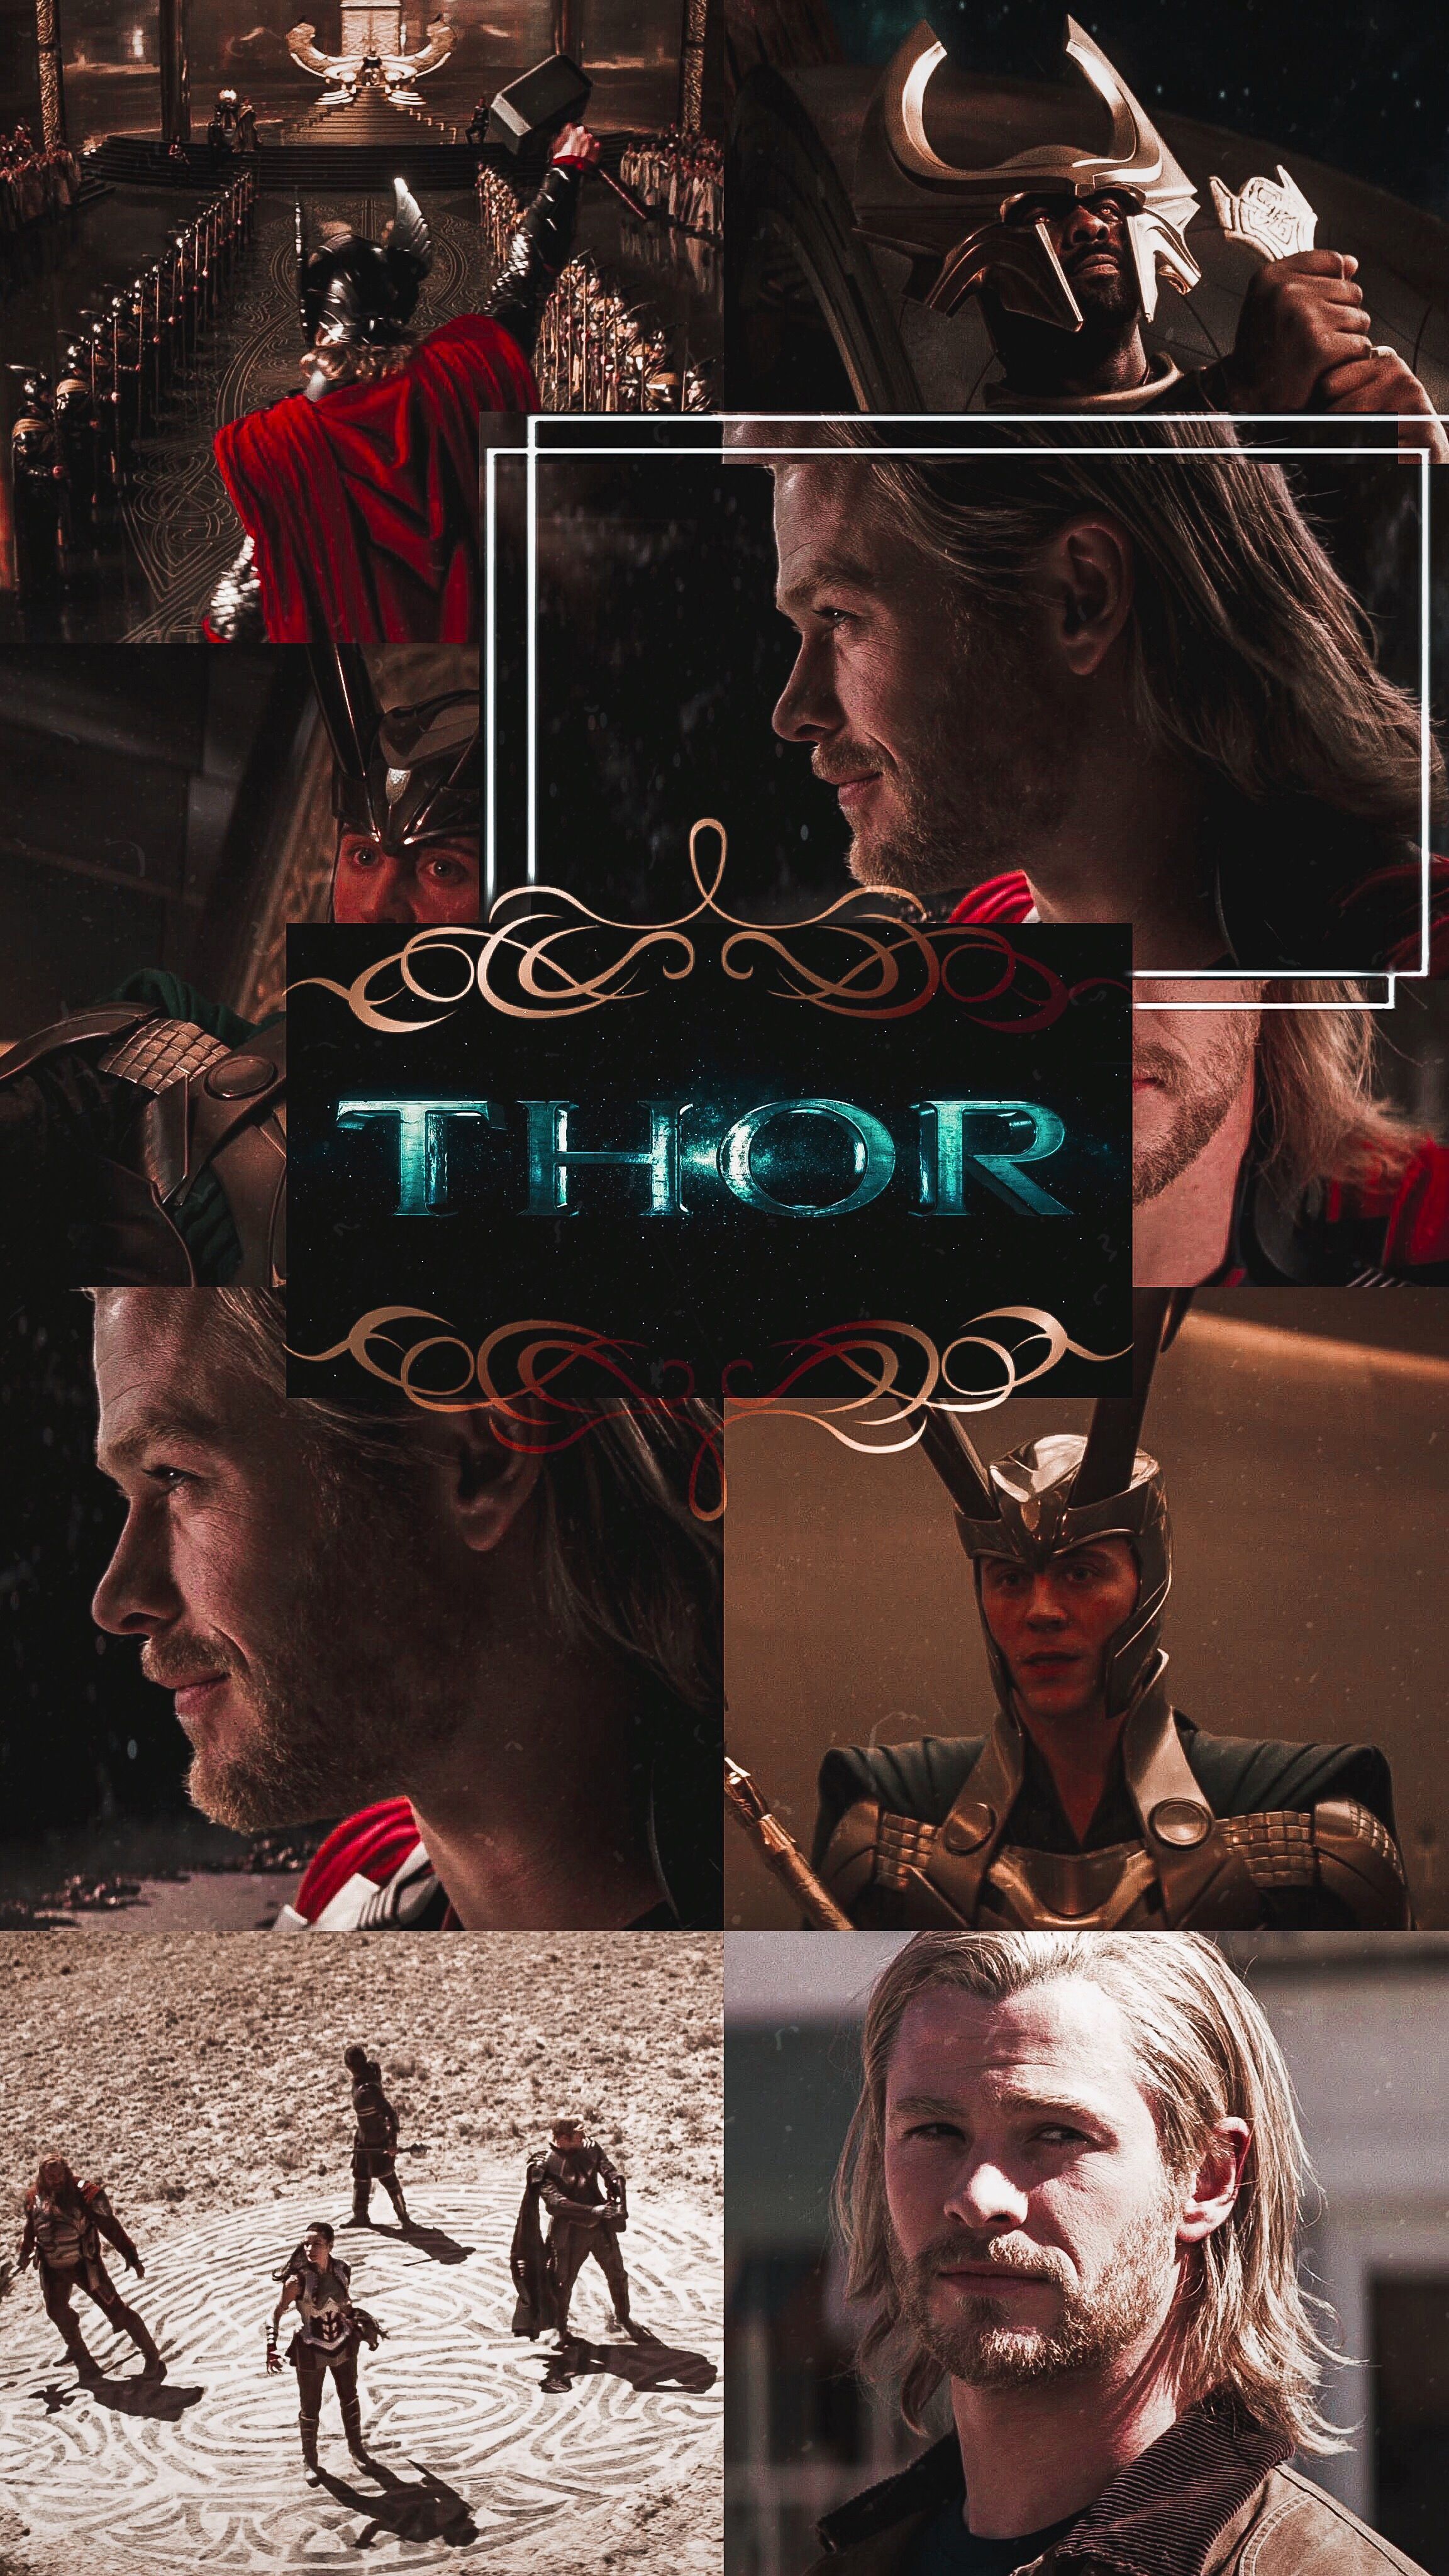 A collage of images from the movie thor - Thor